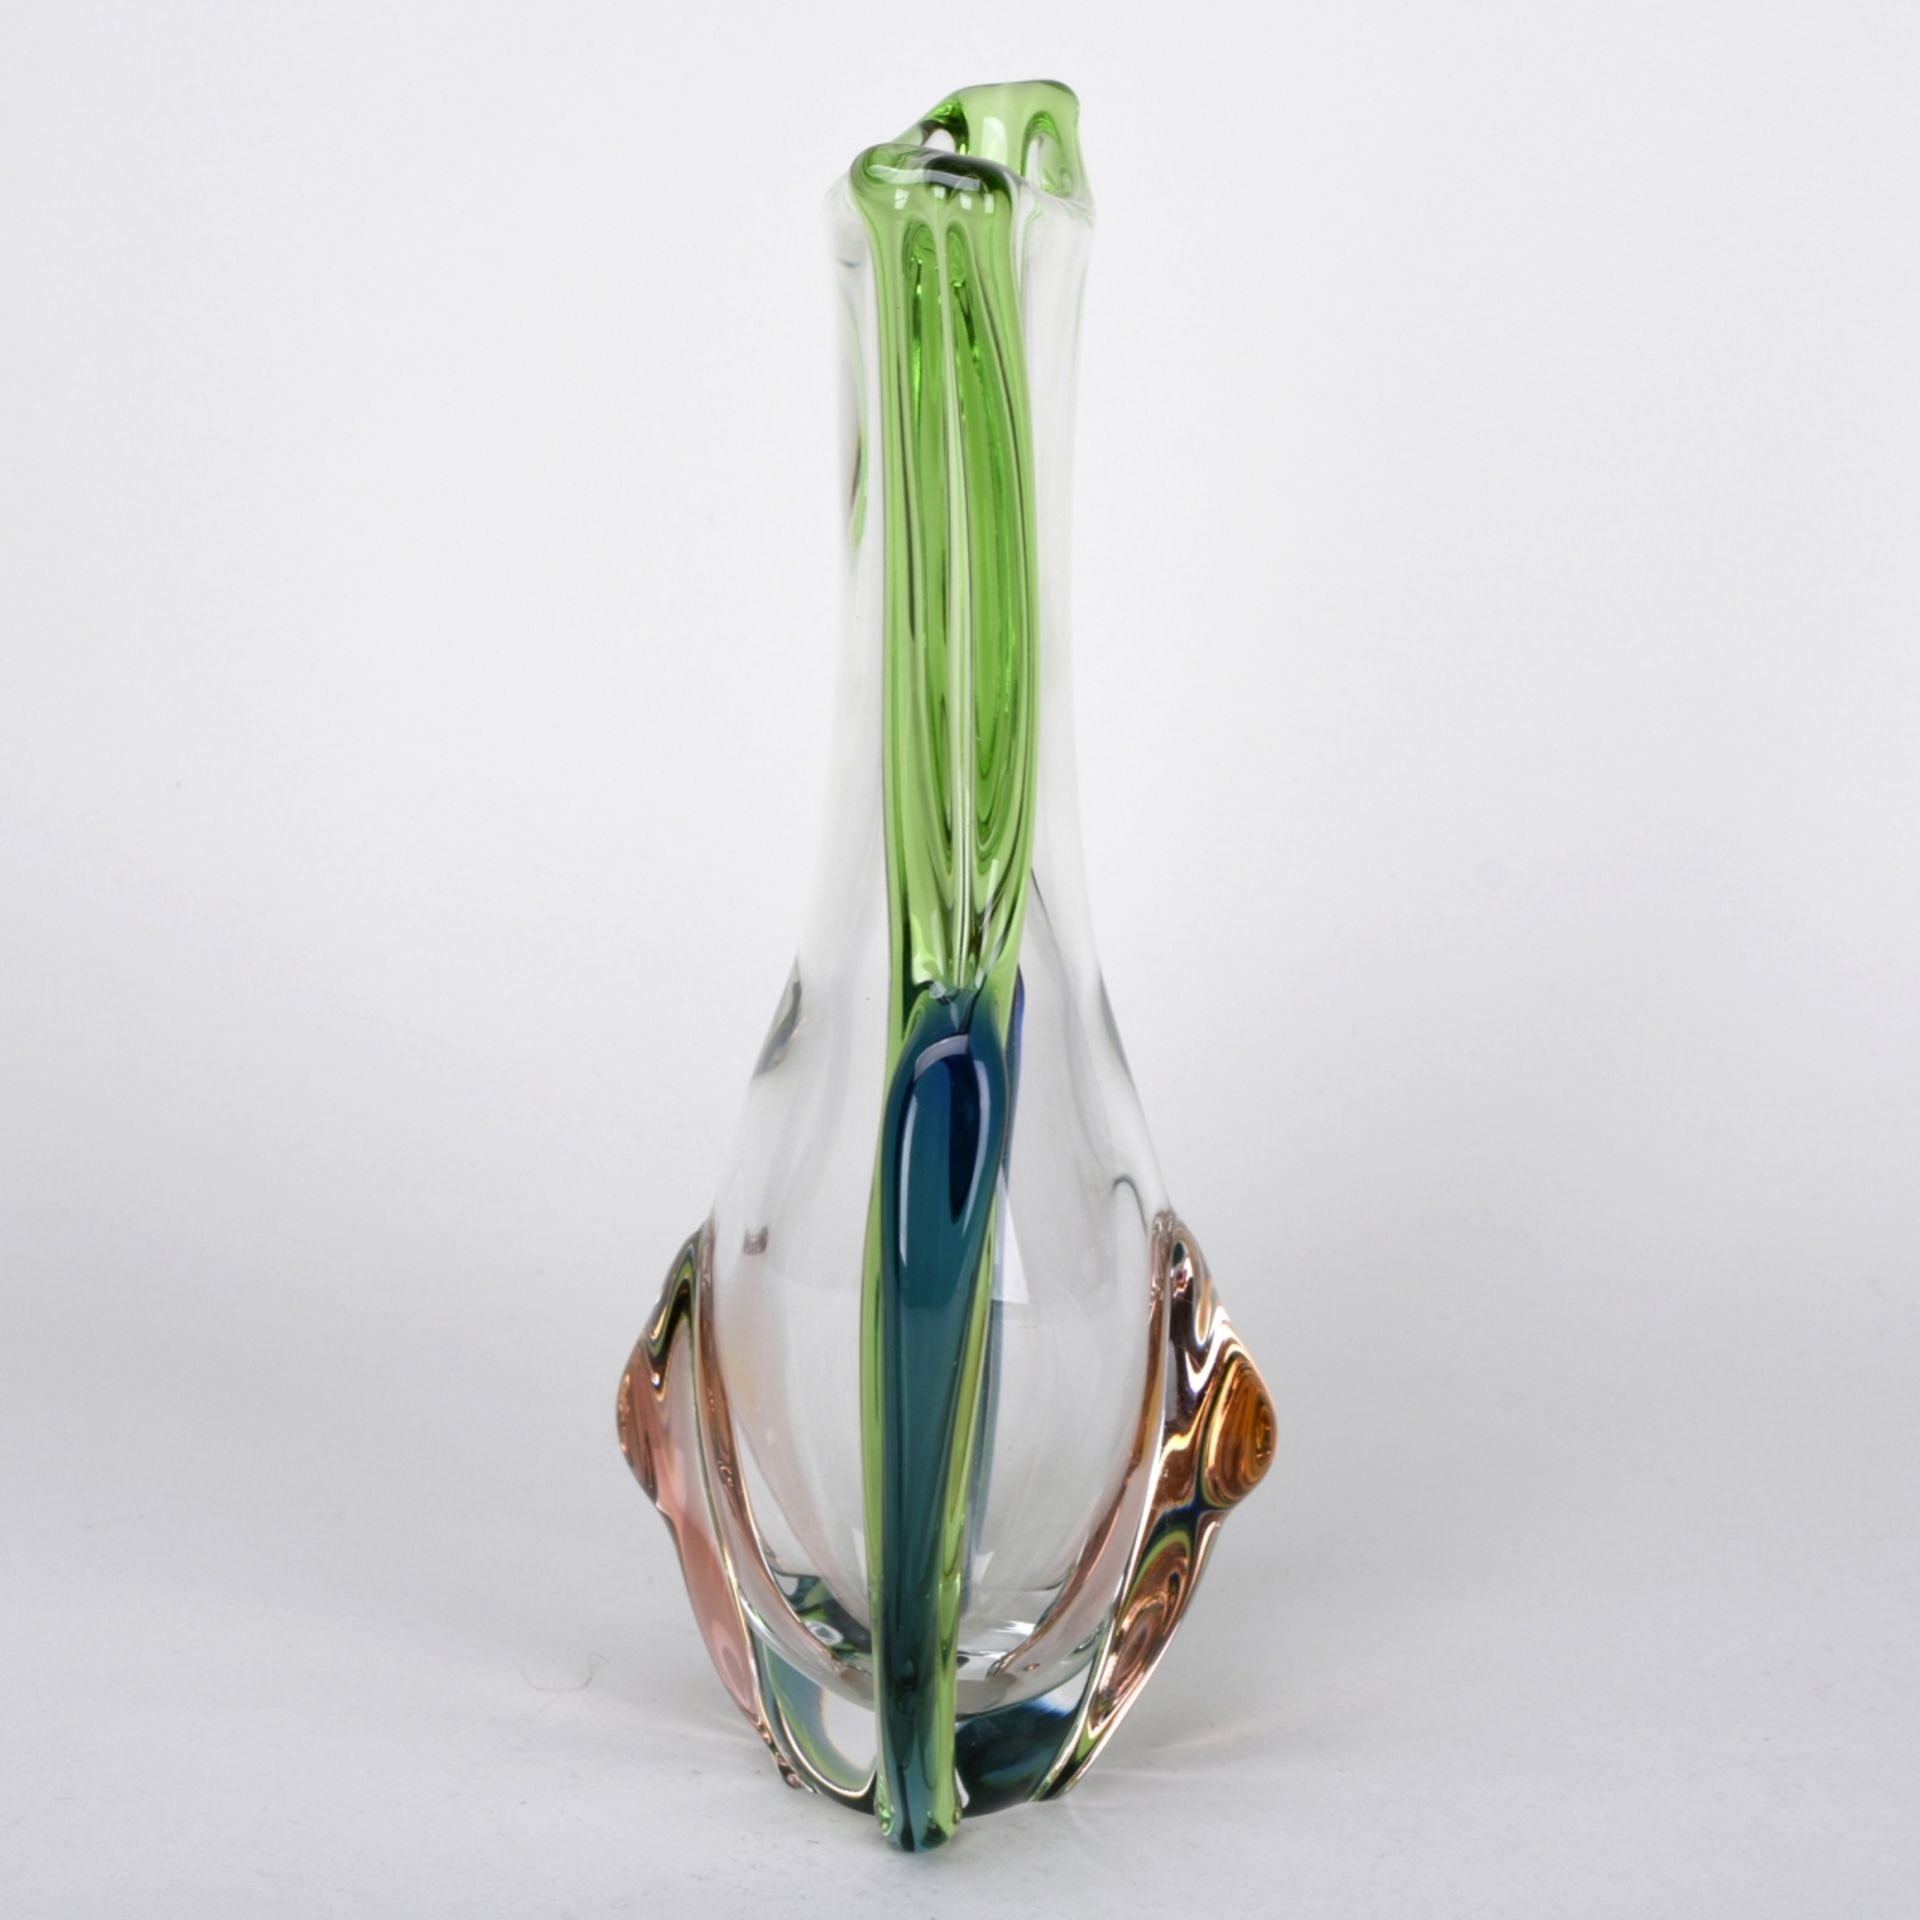 Murano Vase "Sommerso" - Image 3 of 7